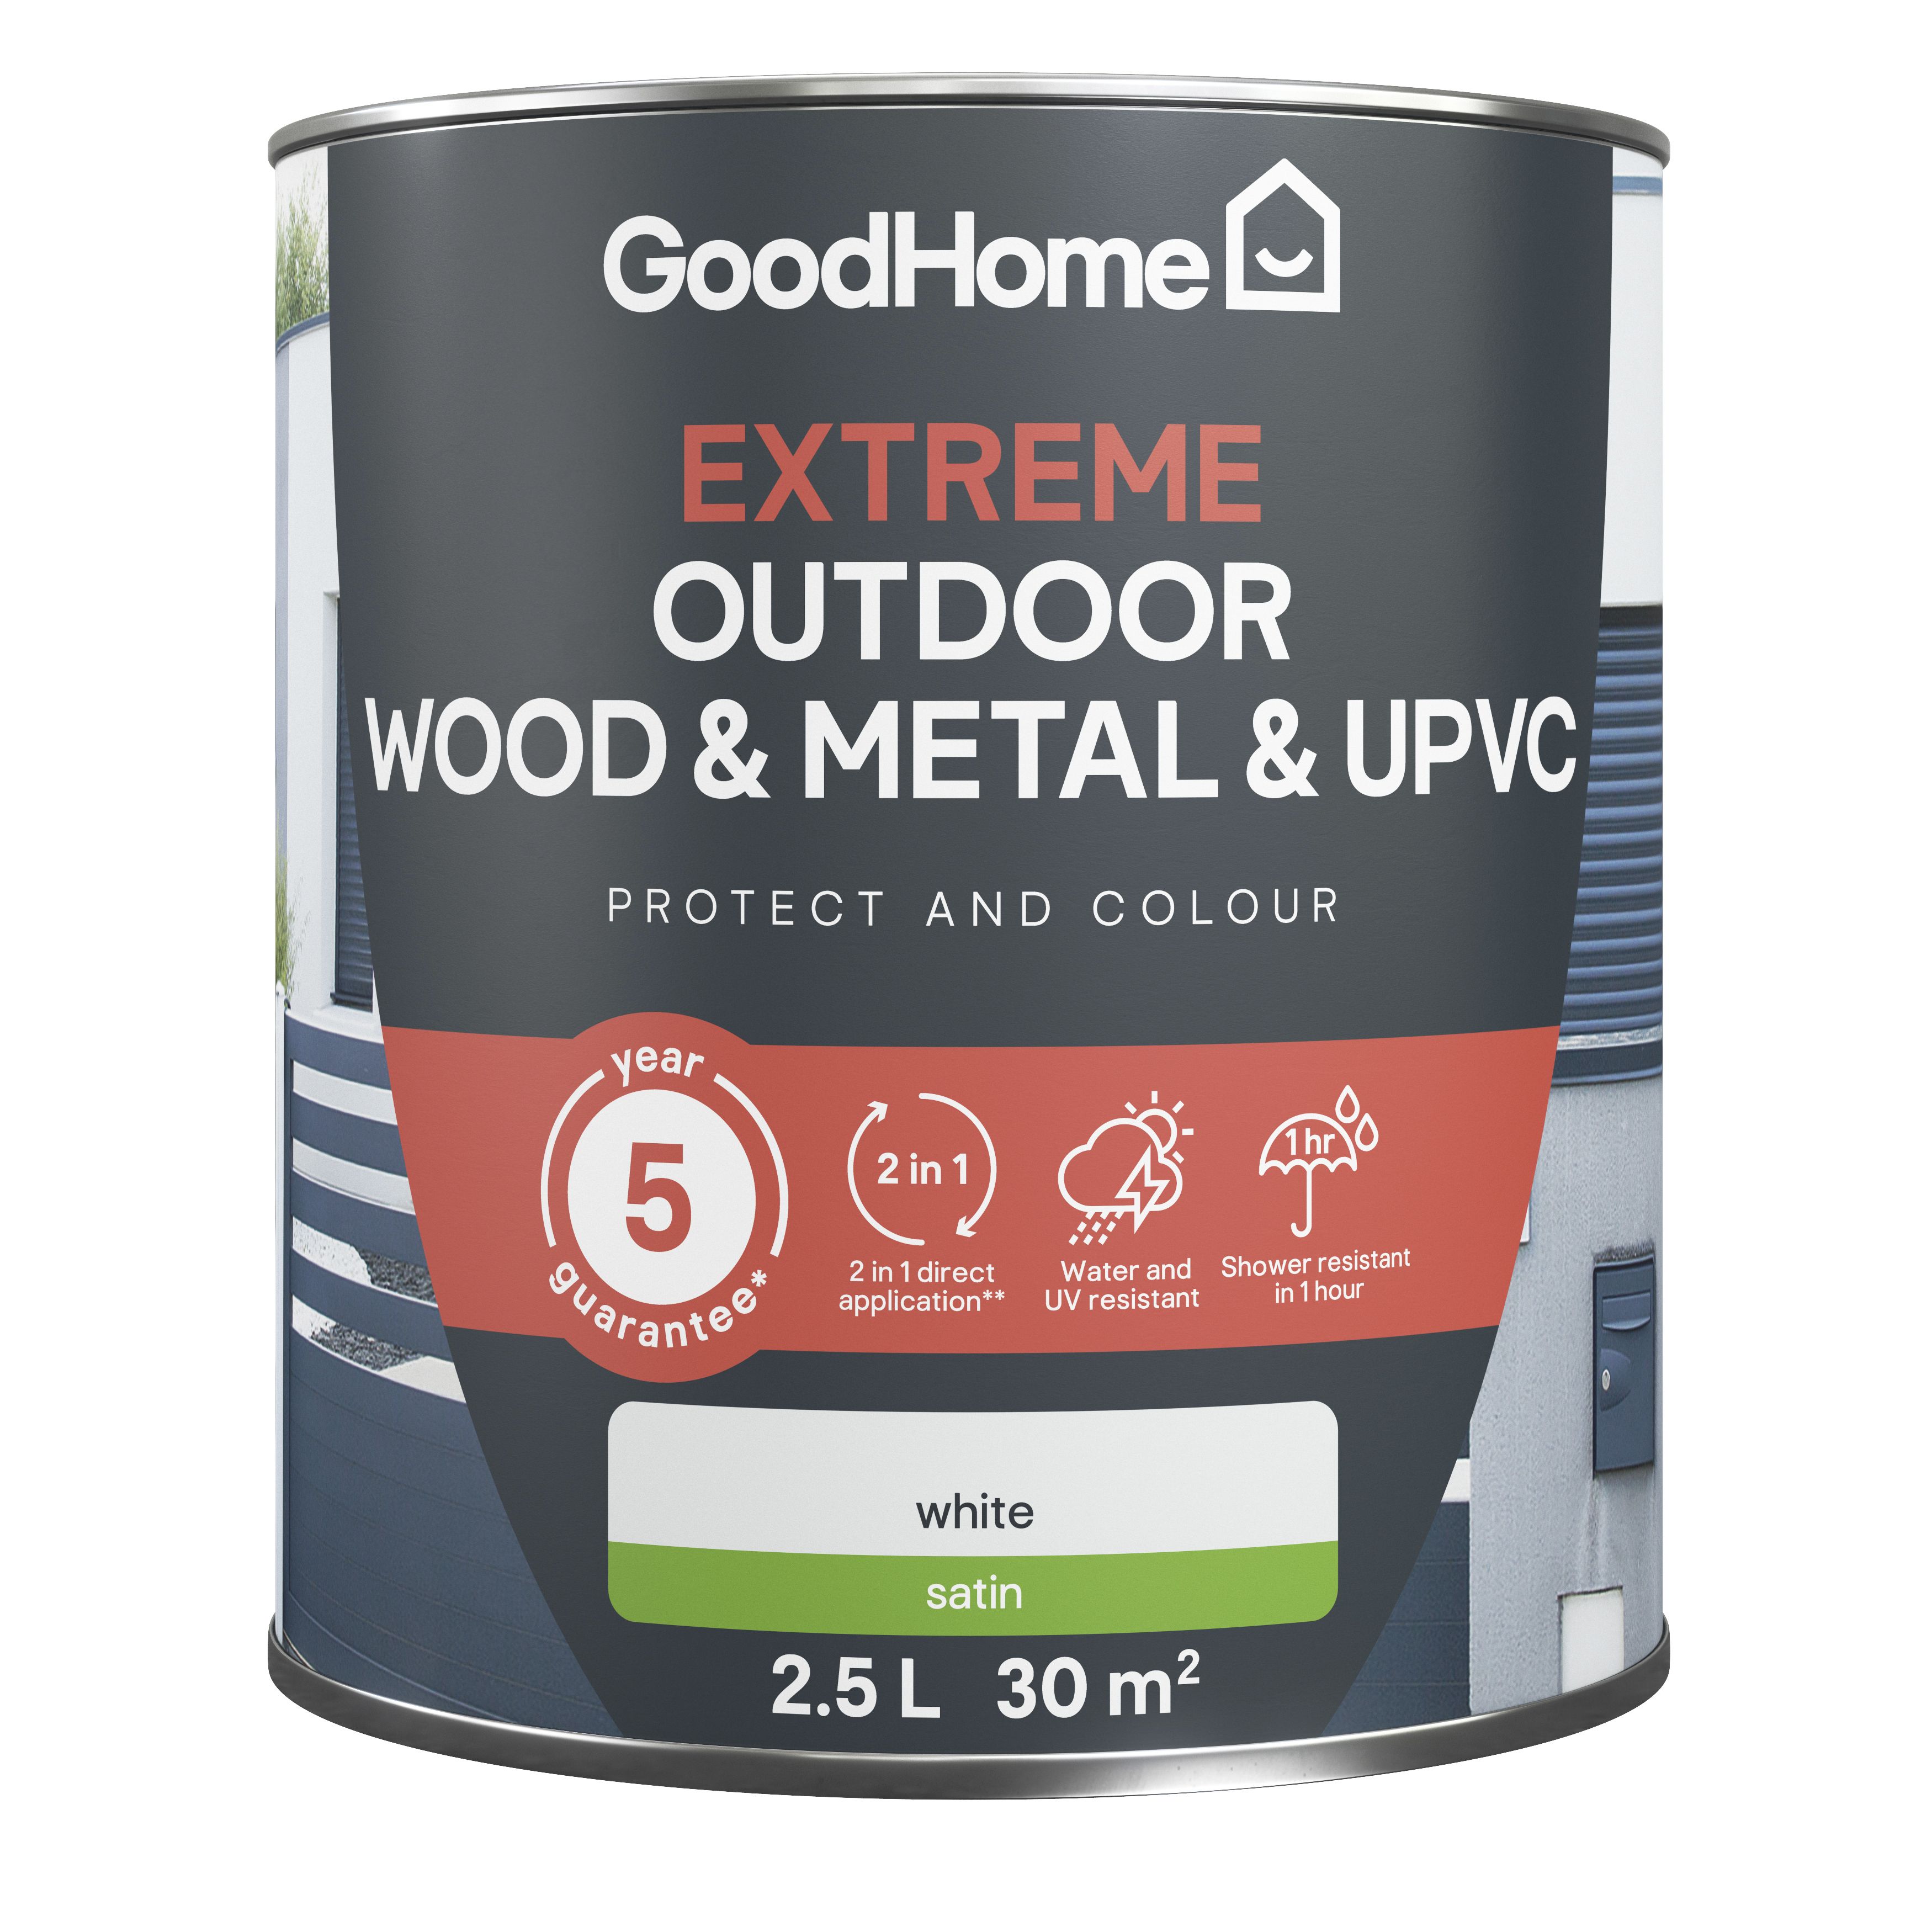 GoodHome Extreme Outdoor White Satinwood Multi-surface paint, 2.5L